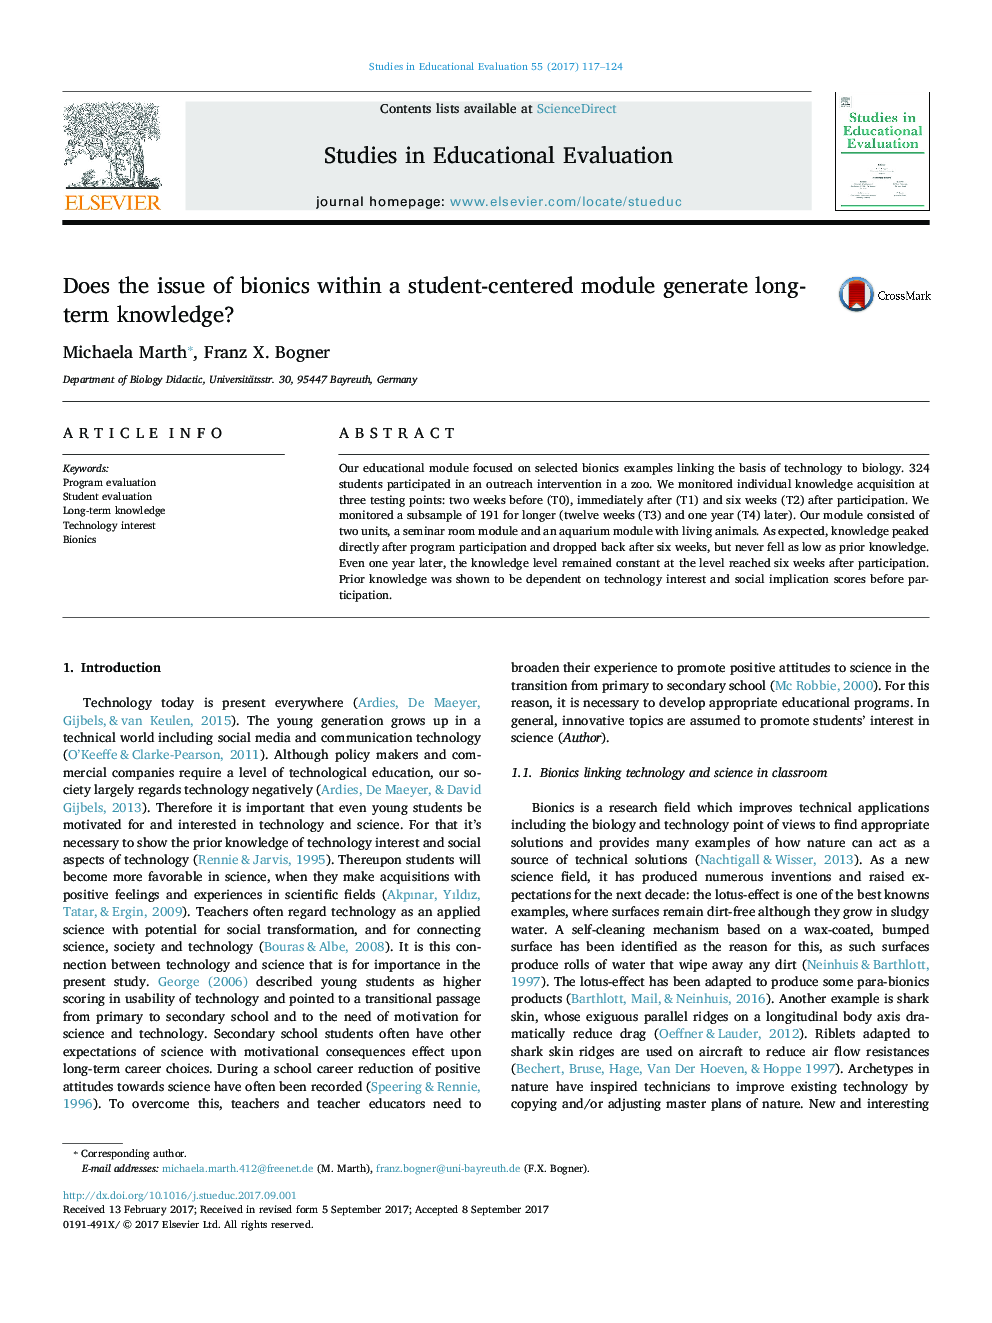 Does the issue of bionics within a student-centered module generate long-term knowledge?